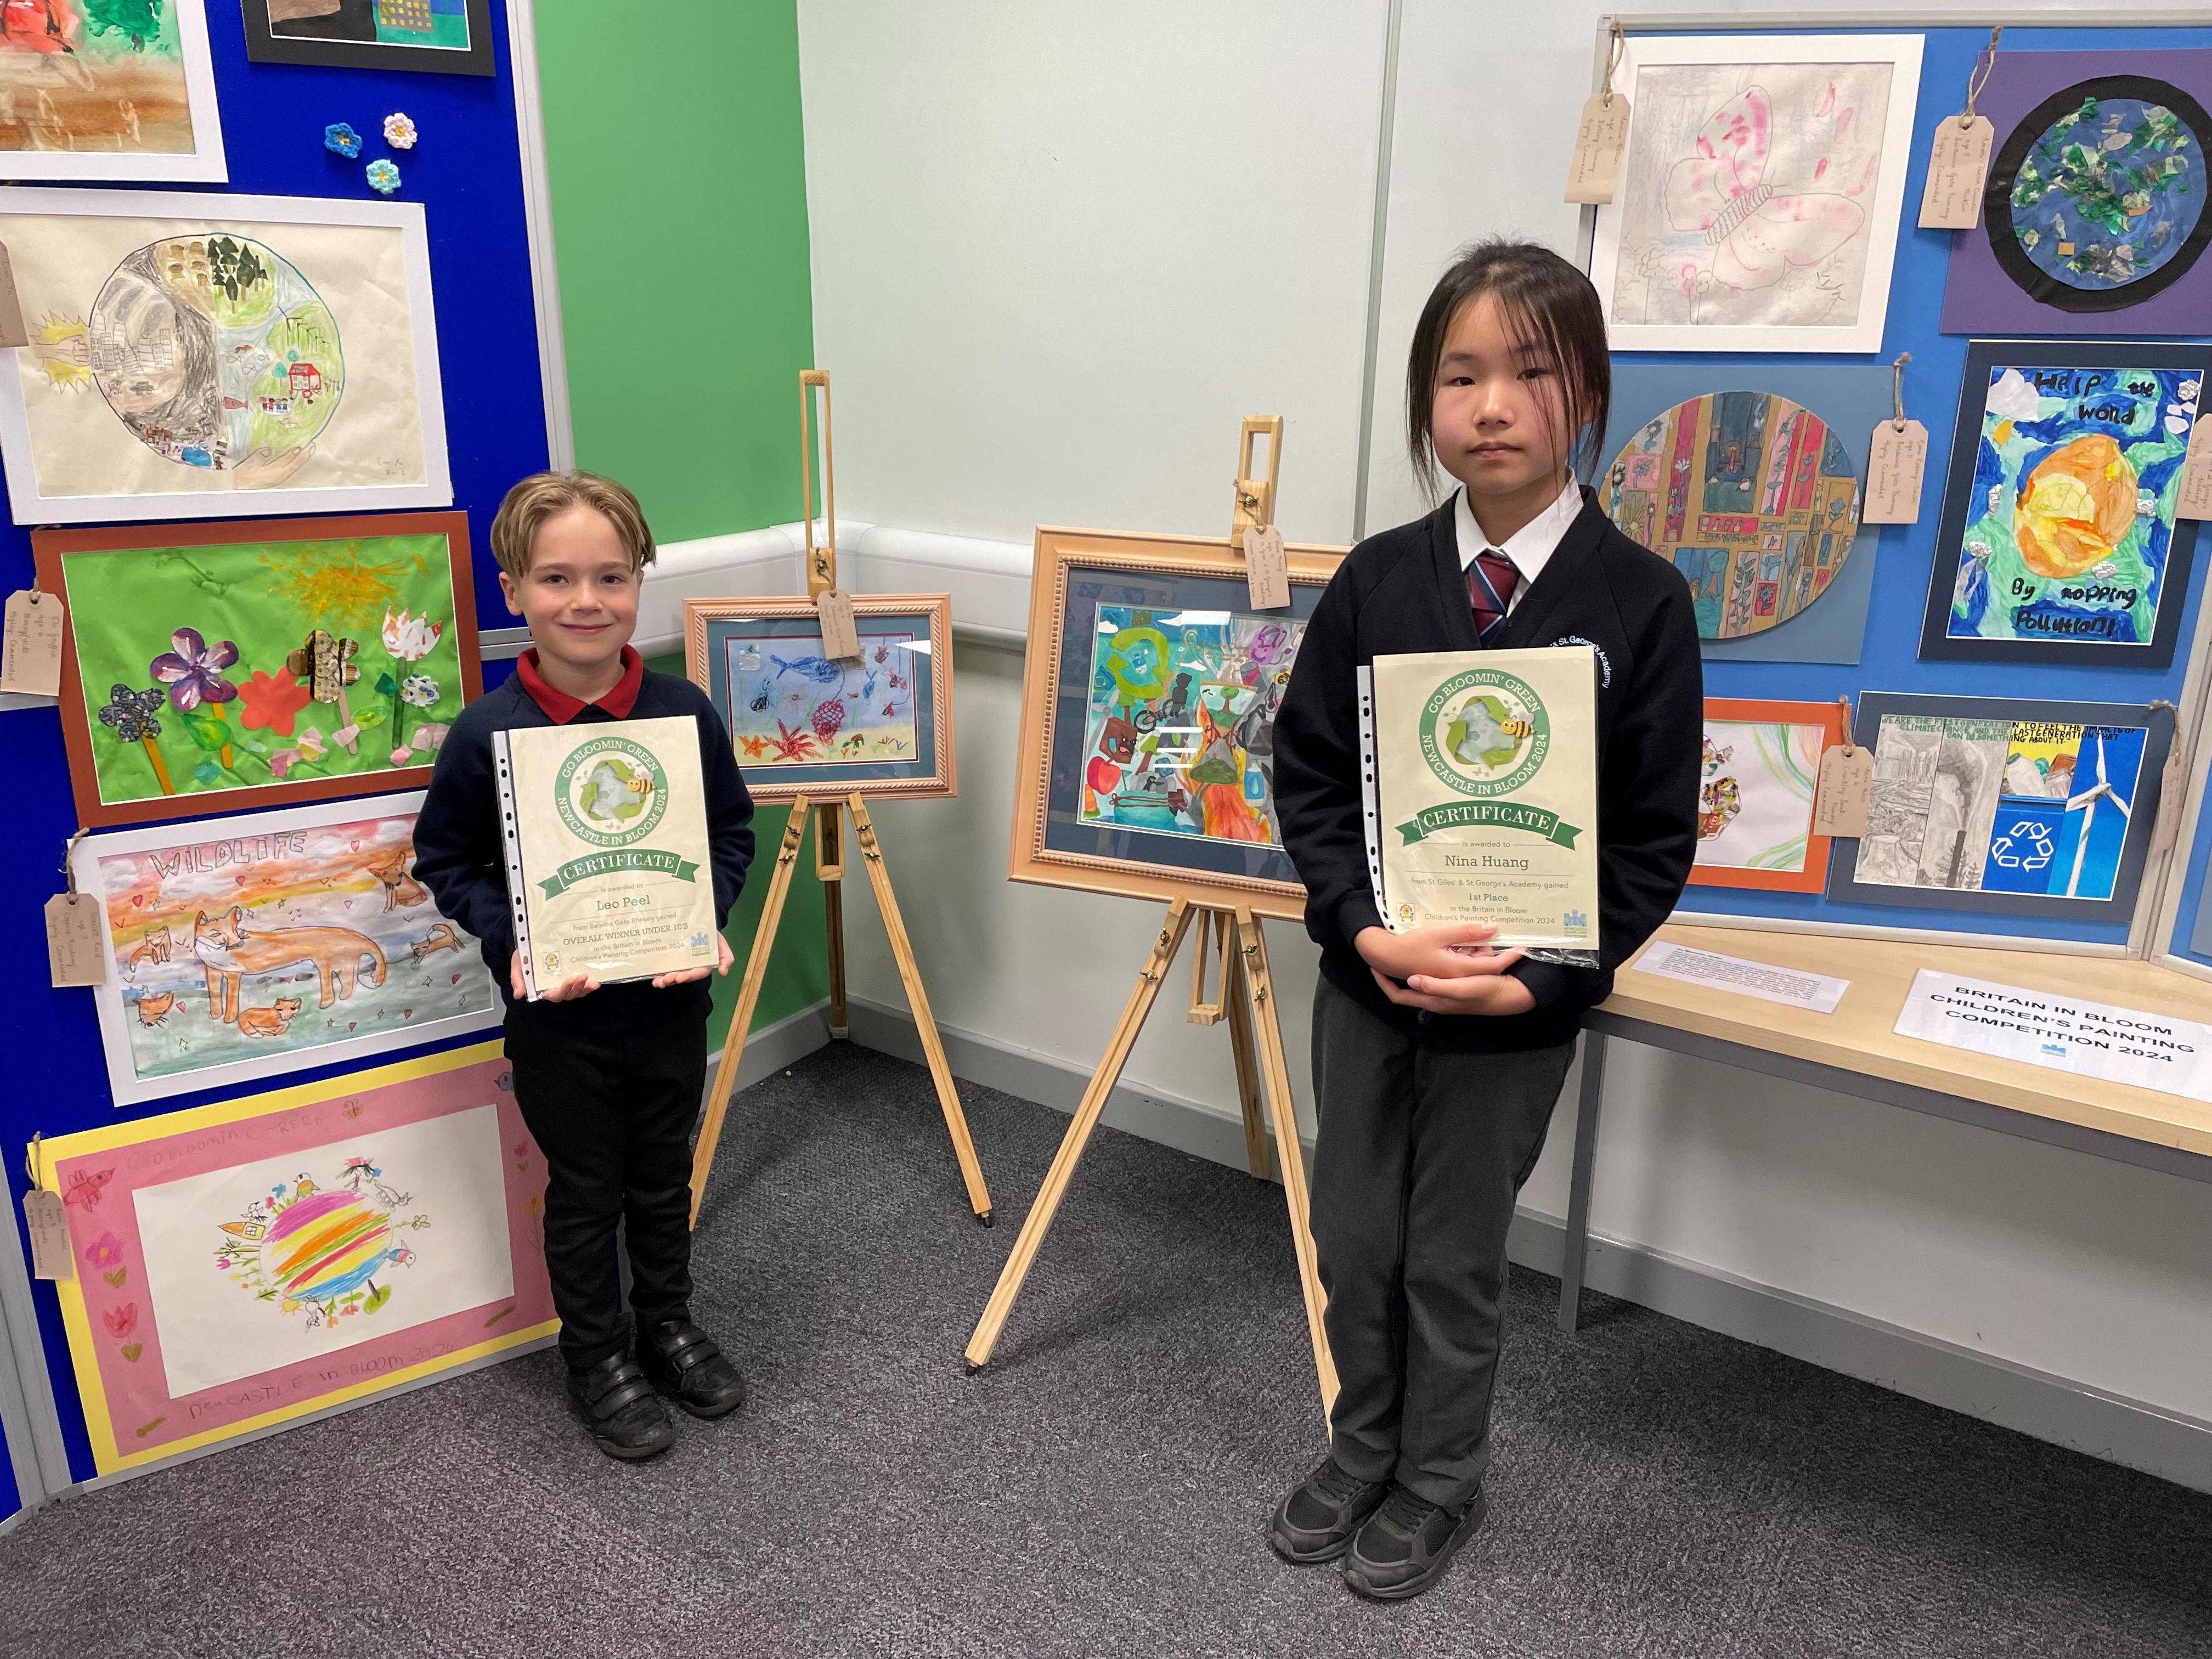 Leo Peel, aged six, and Nina Huang, 10, are the main winners of the Council's latest Britain in Bloom children's art competition.